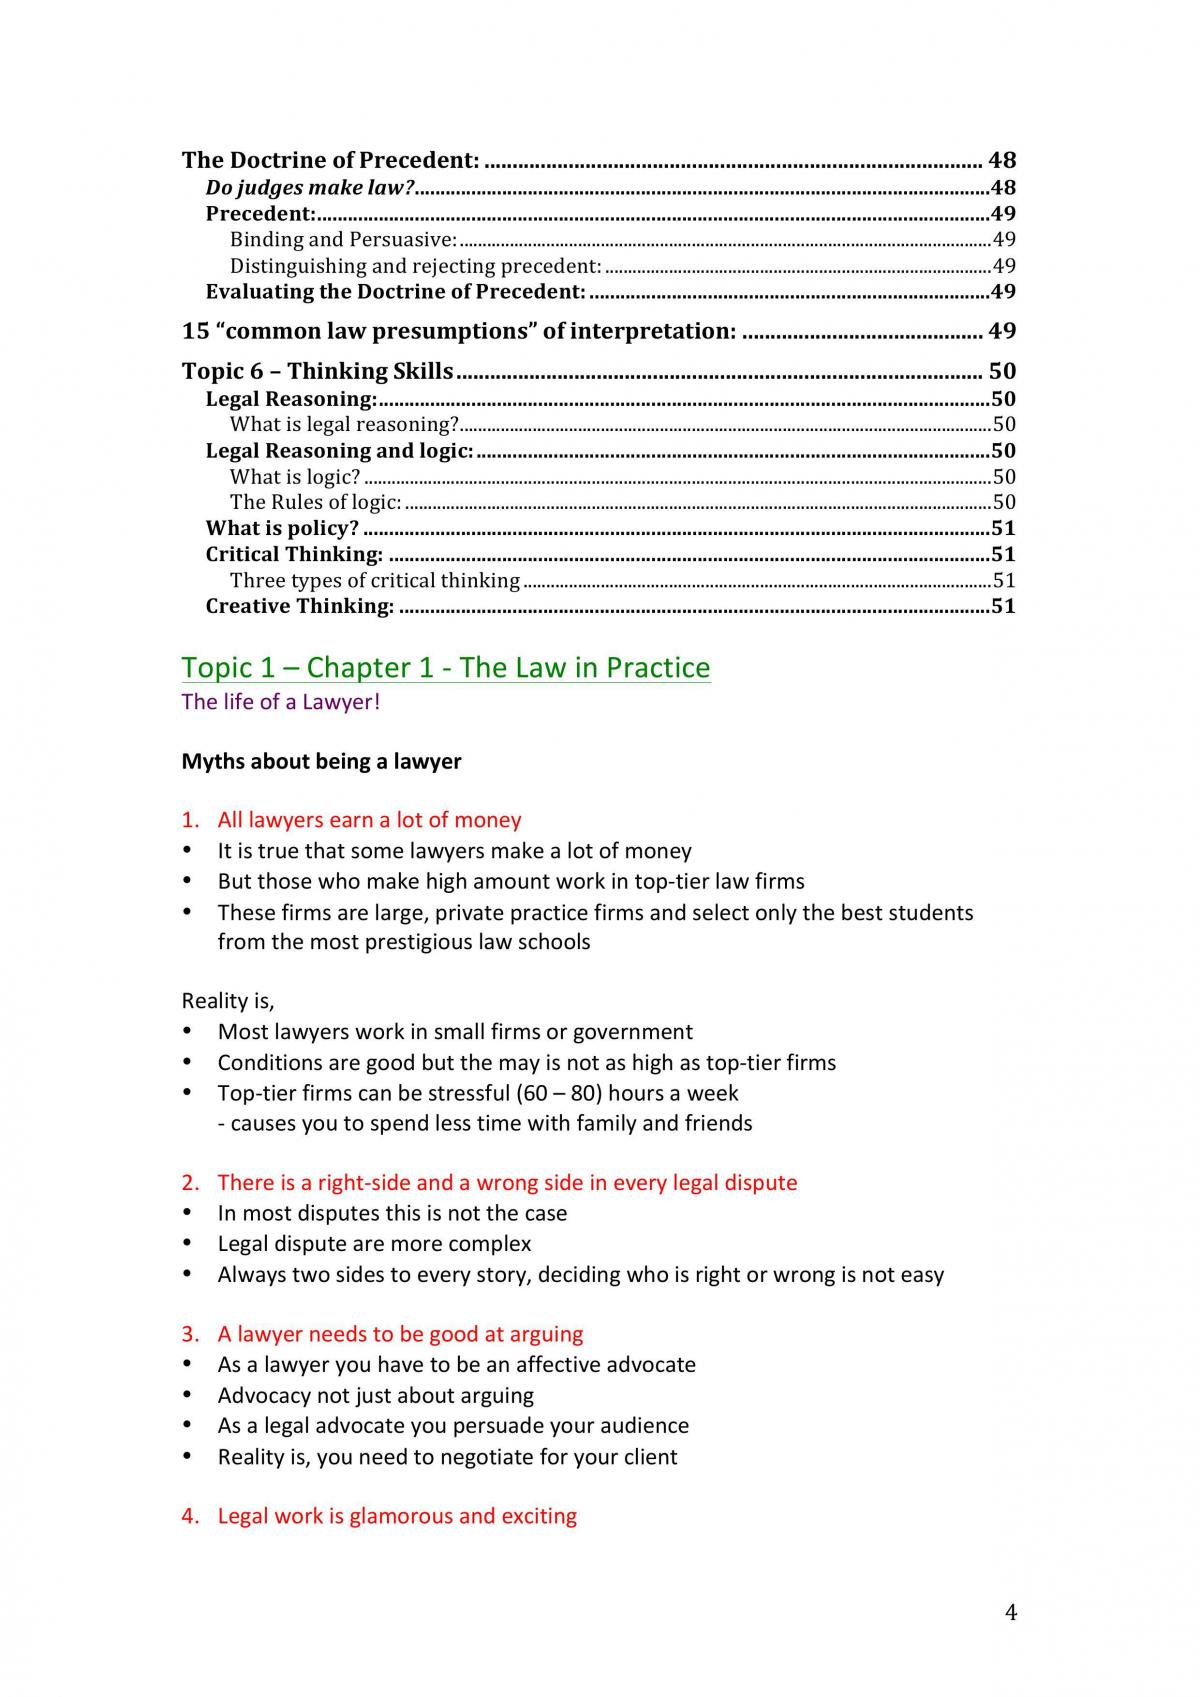 Legal Principles and Skills - Page 4